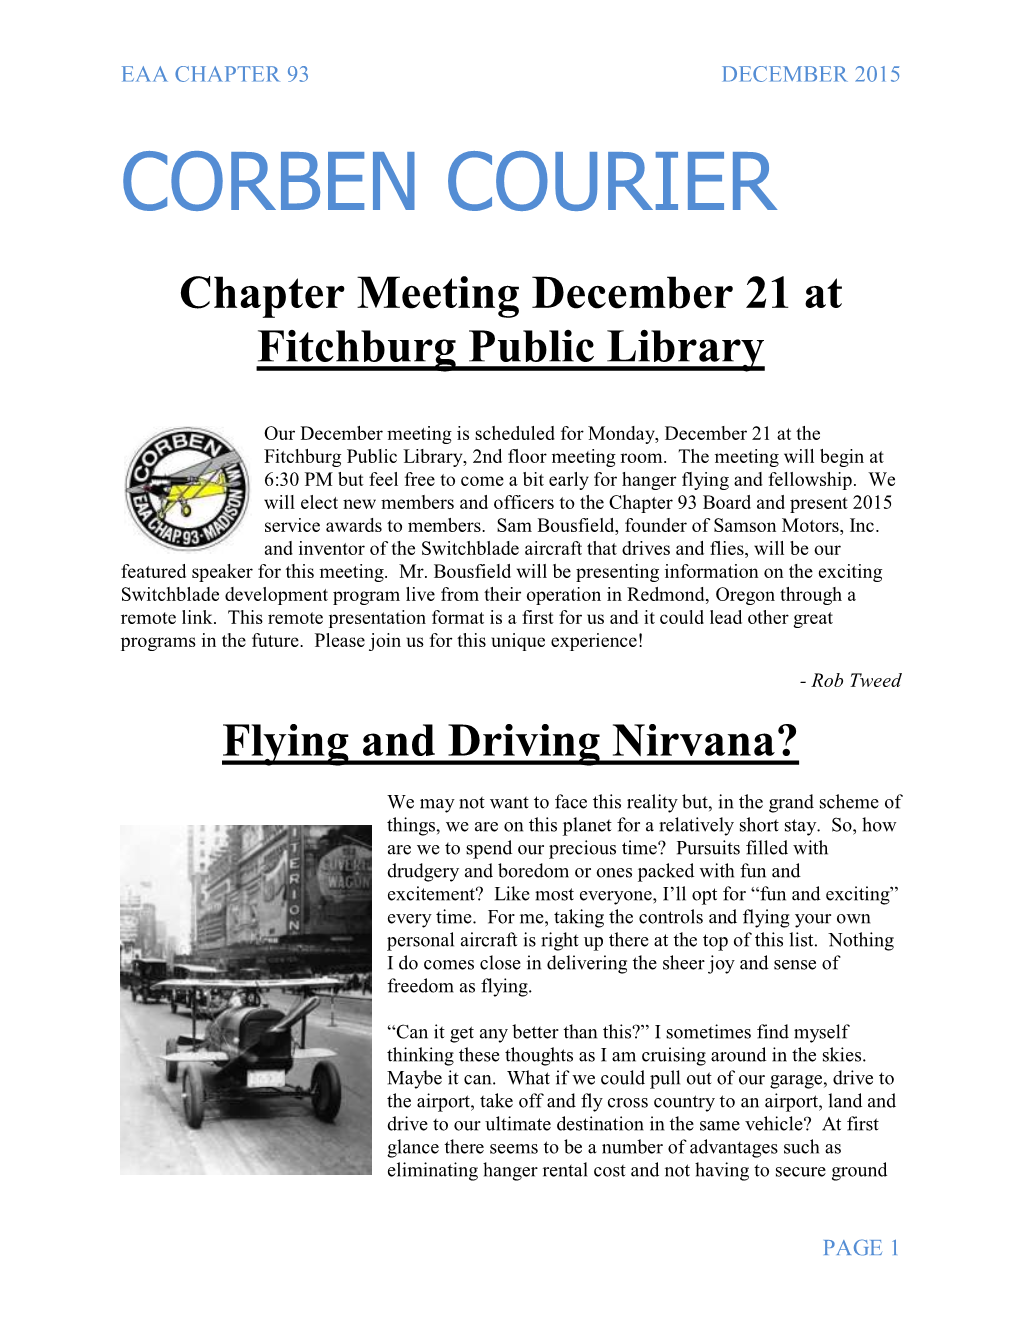 CORBEN COURIER Chapter Meeting December 21 at Fitchburg Public Library